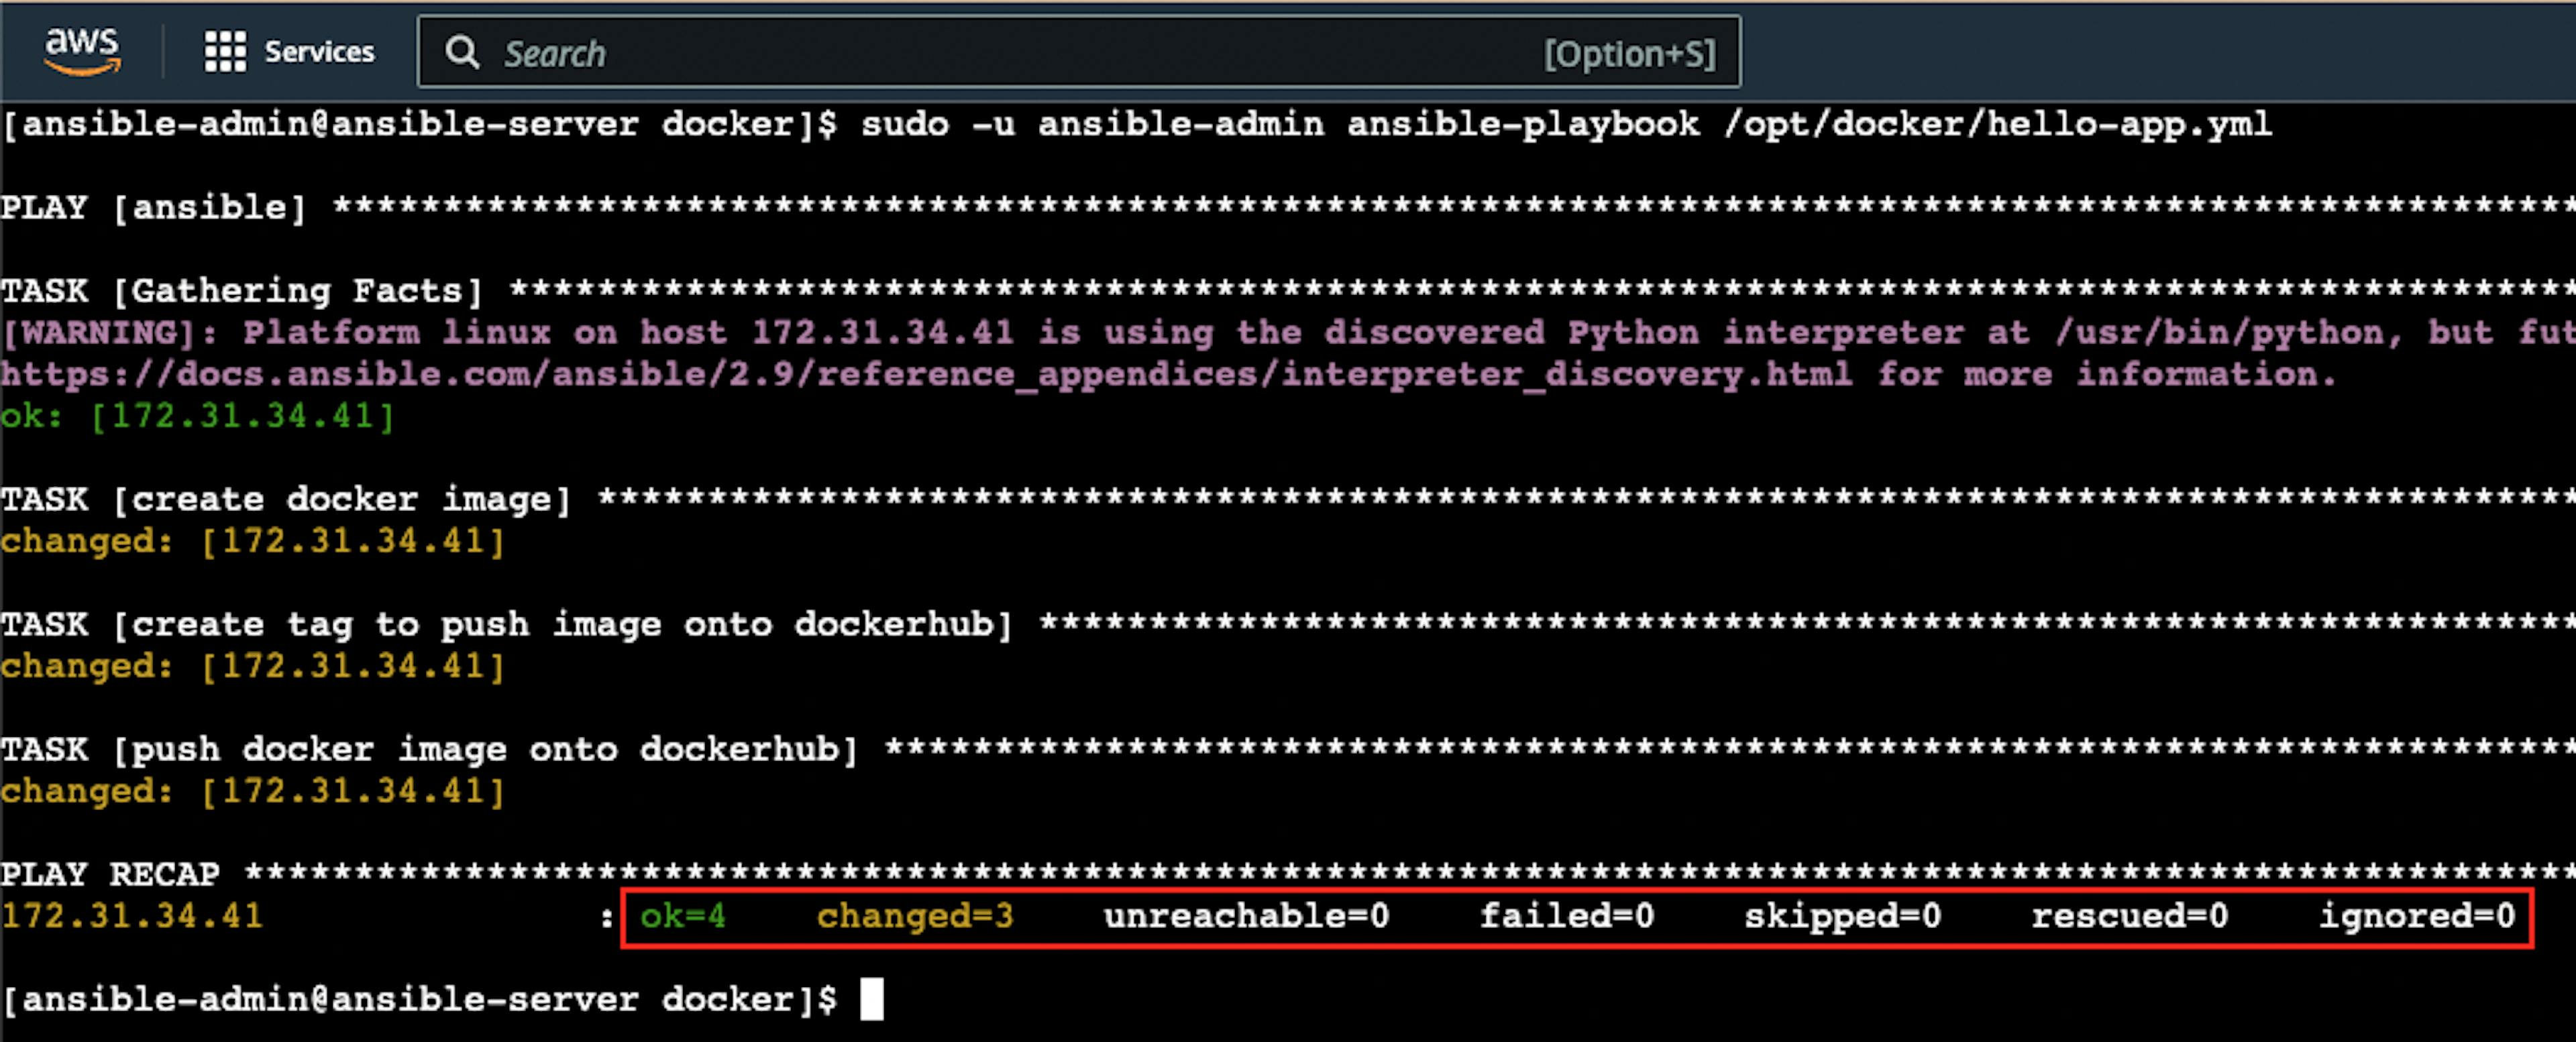 The screenshot of the successful execution result of the ansible playbook for docker tasks